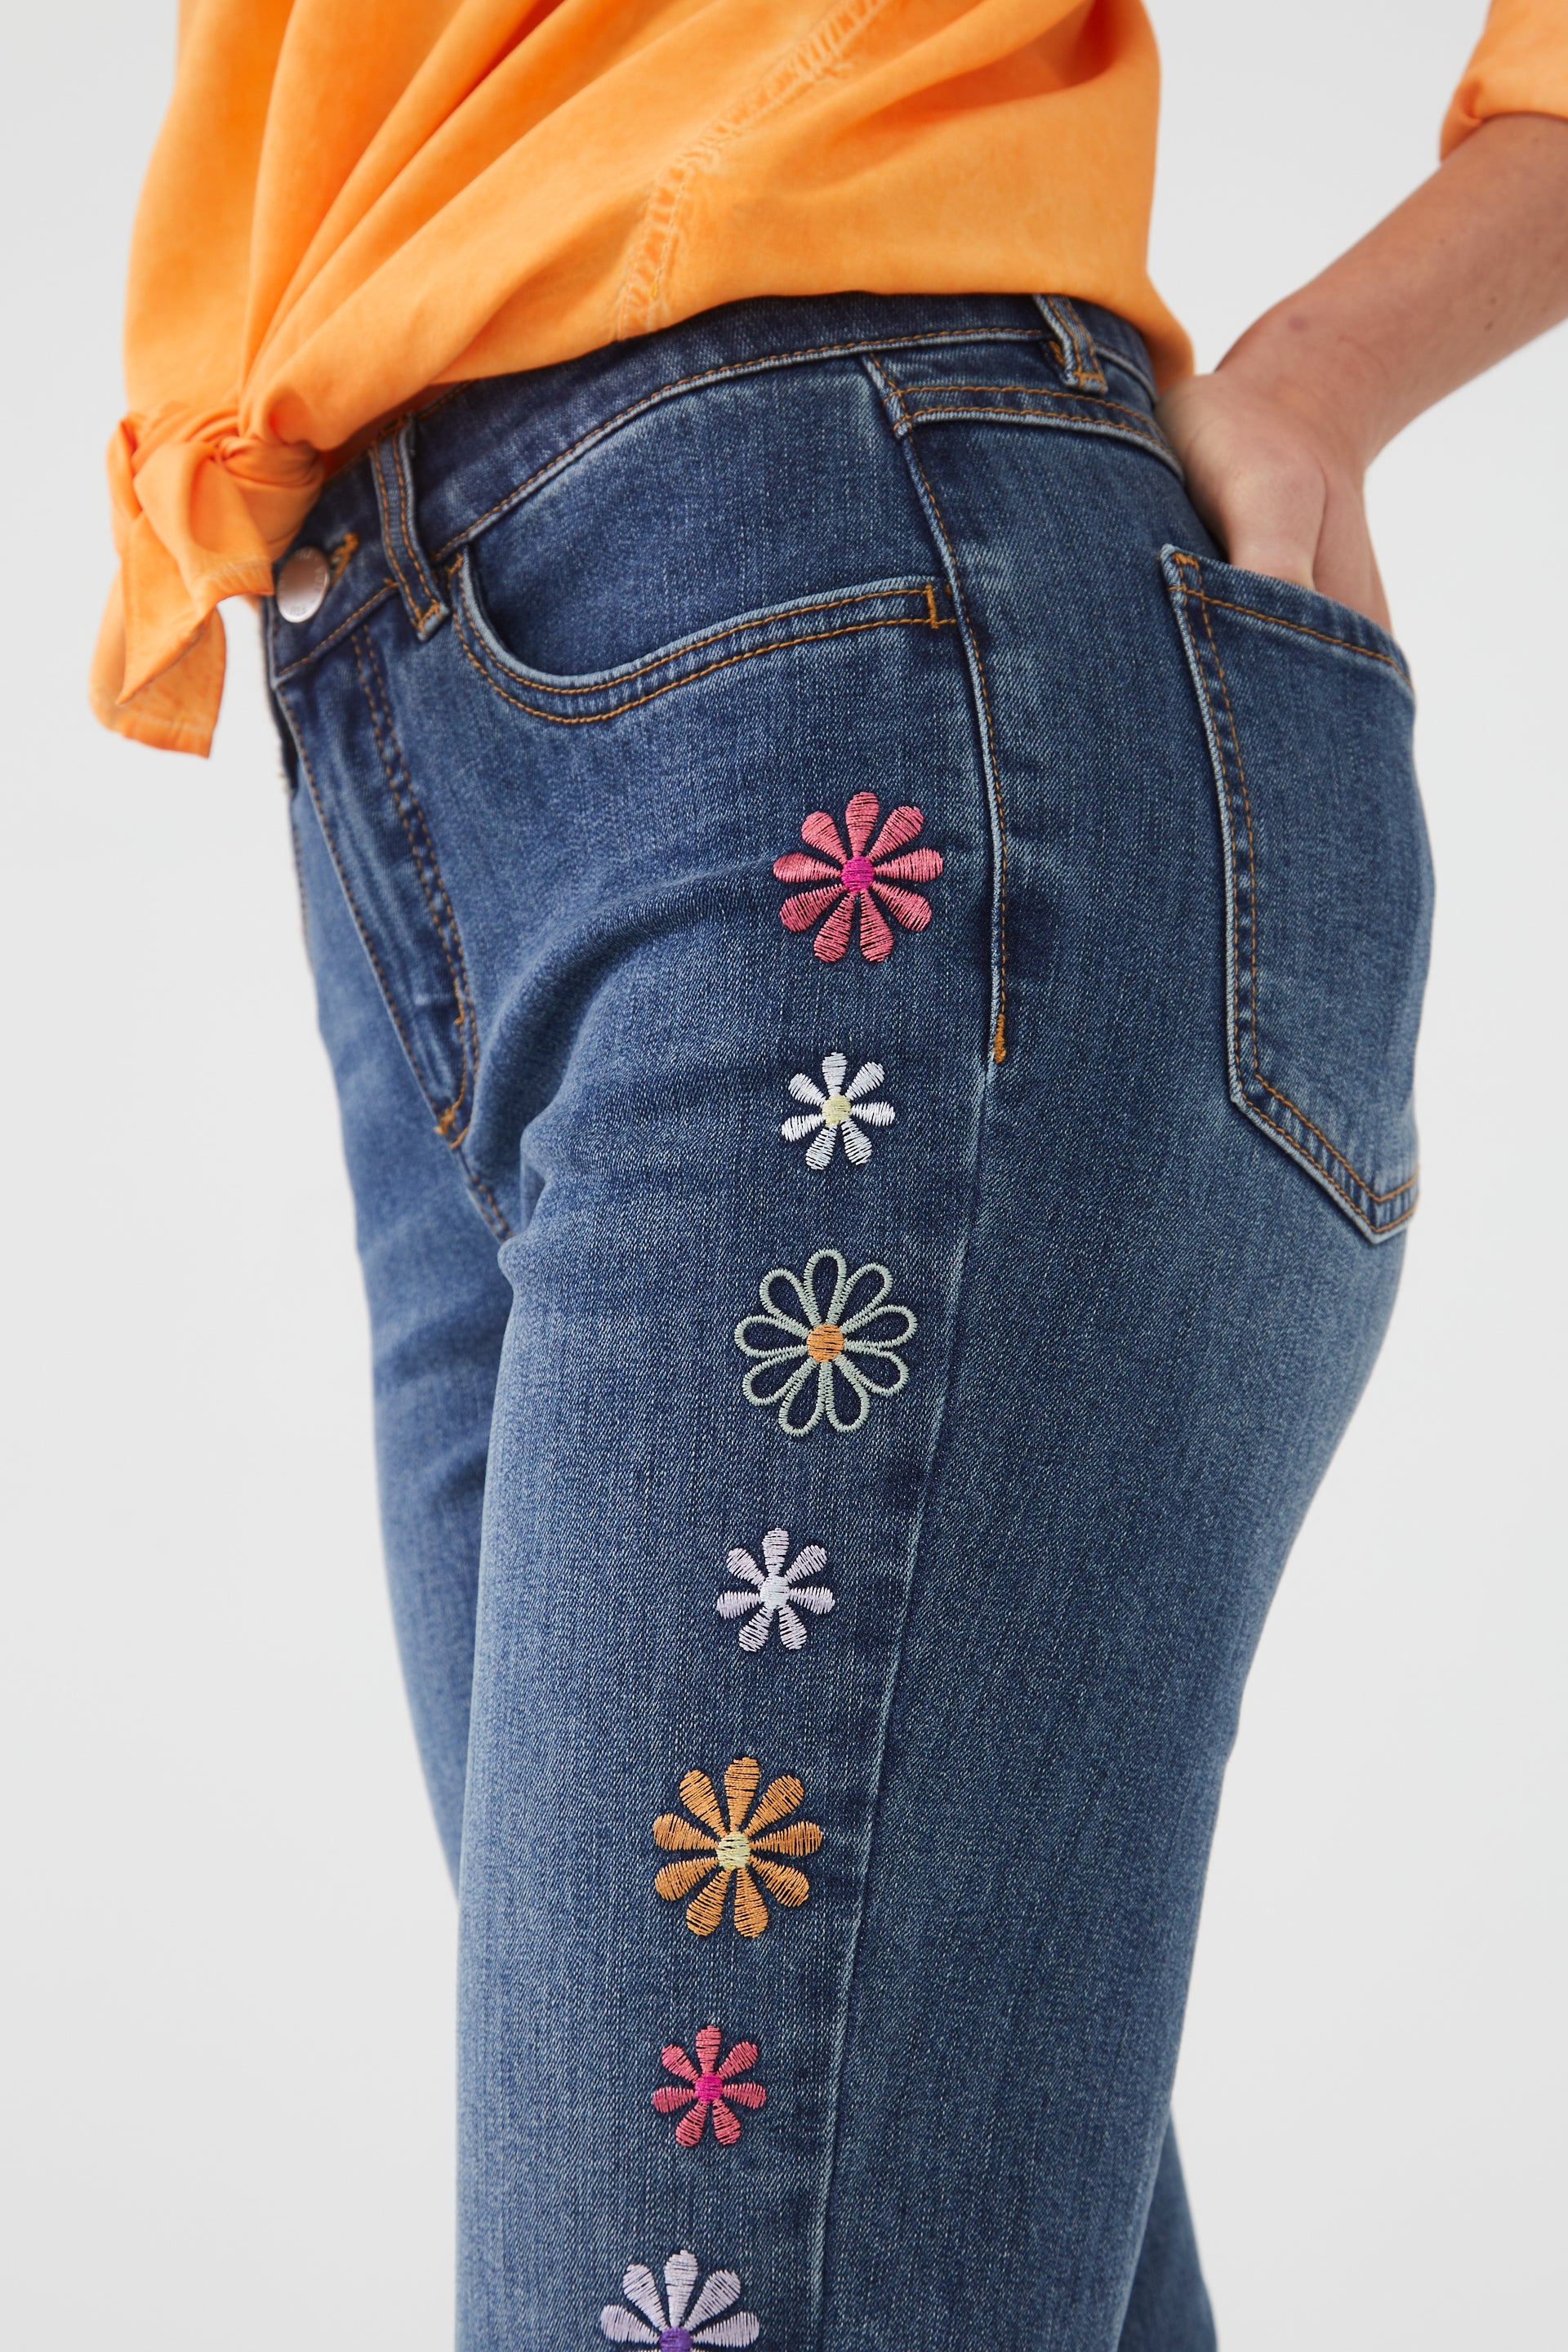 Daisy Embroidered Pencil Crop Jean by FDJ